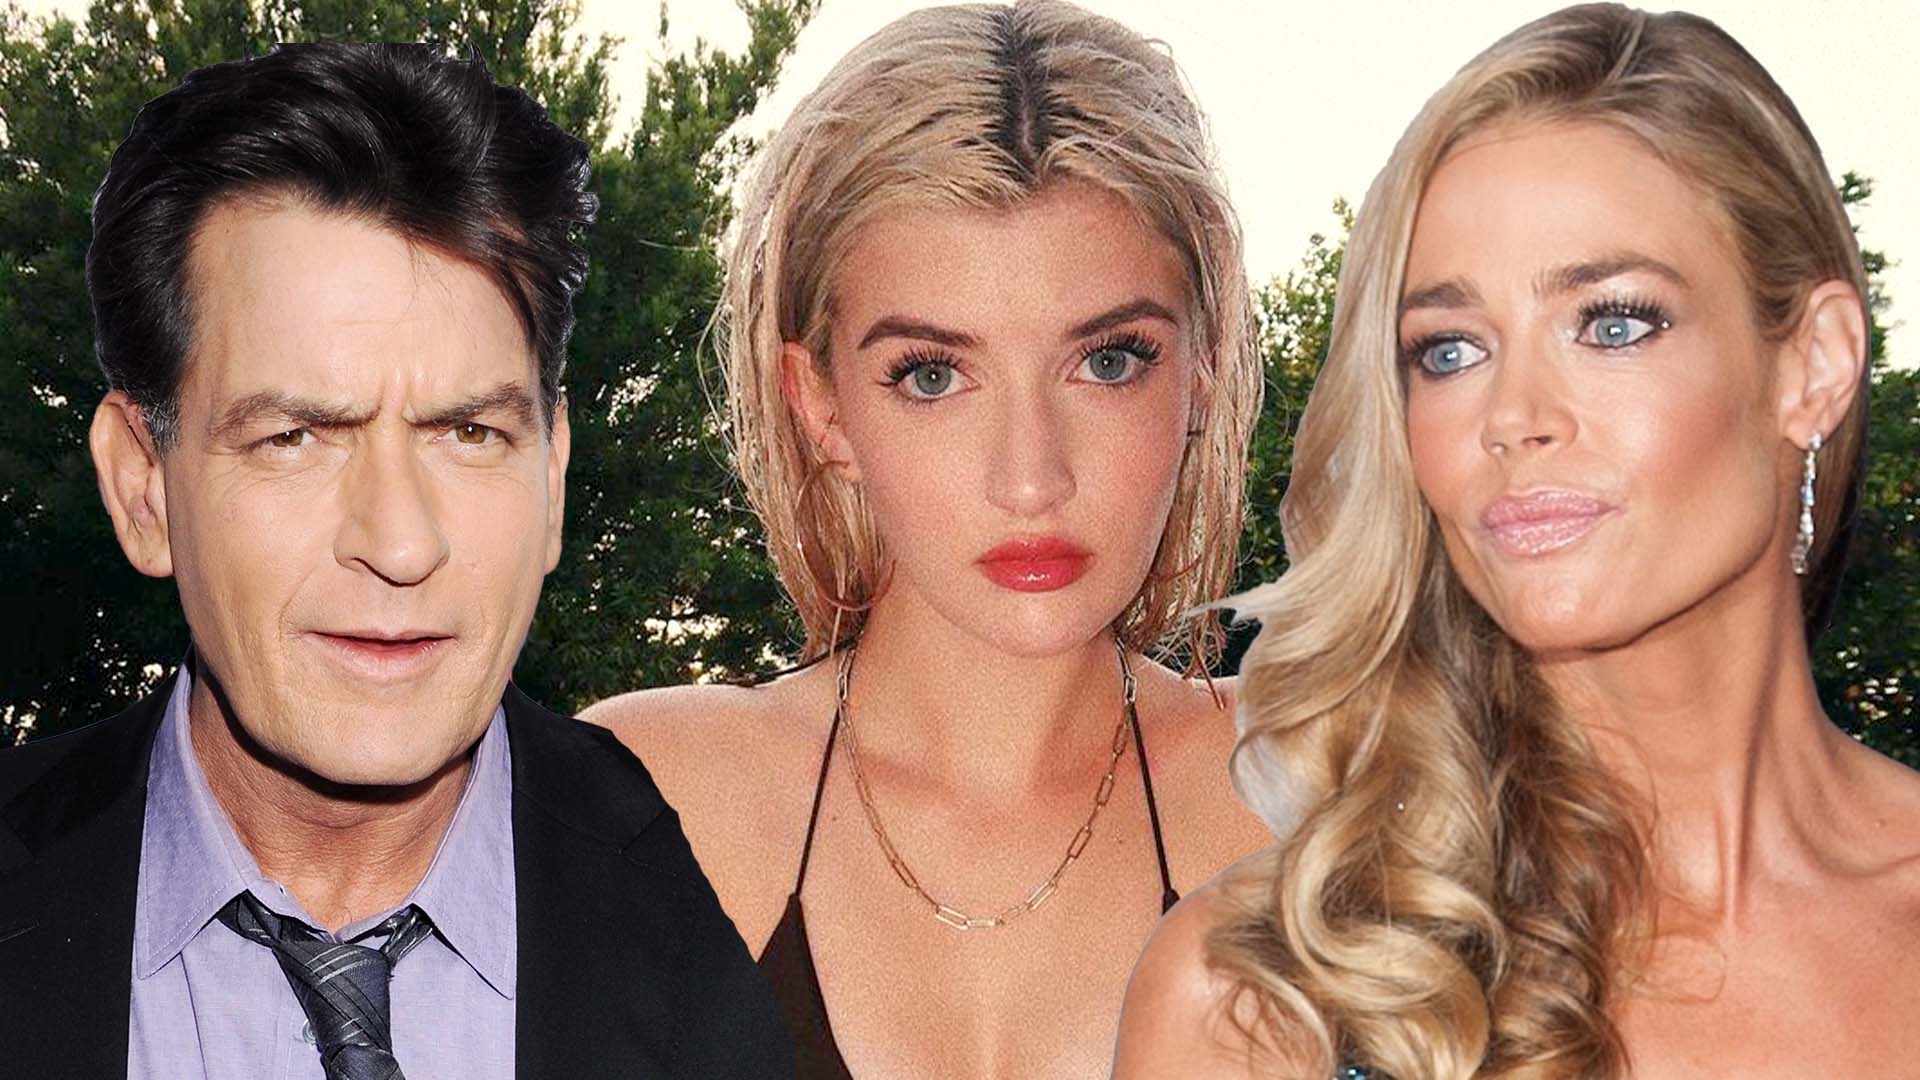 Charlie Sheen and Denise Richards Daughter Sami Shares Her Routine as a Sex Worker Entertainment Tonight image